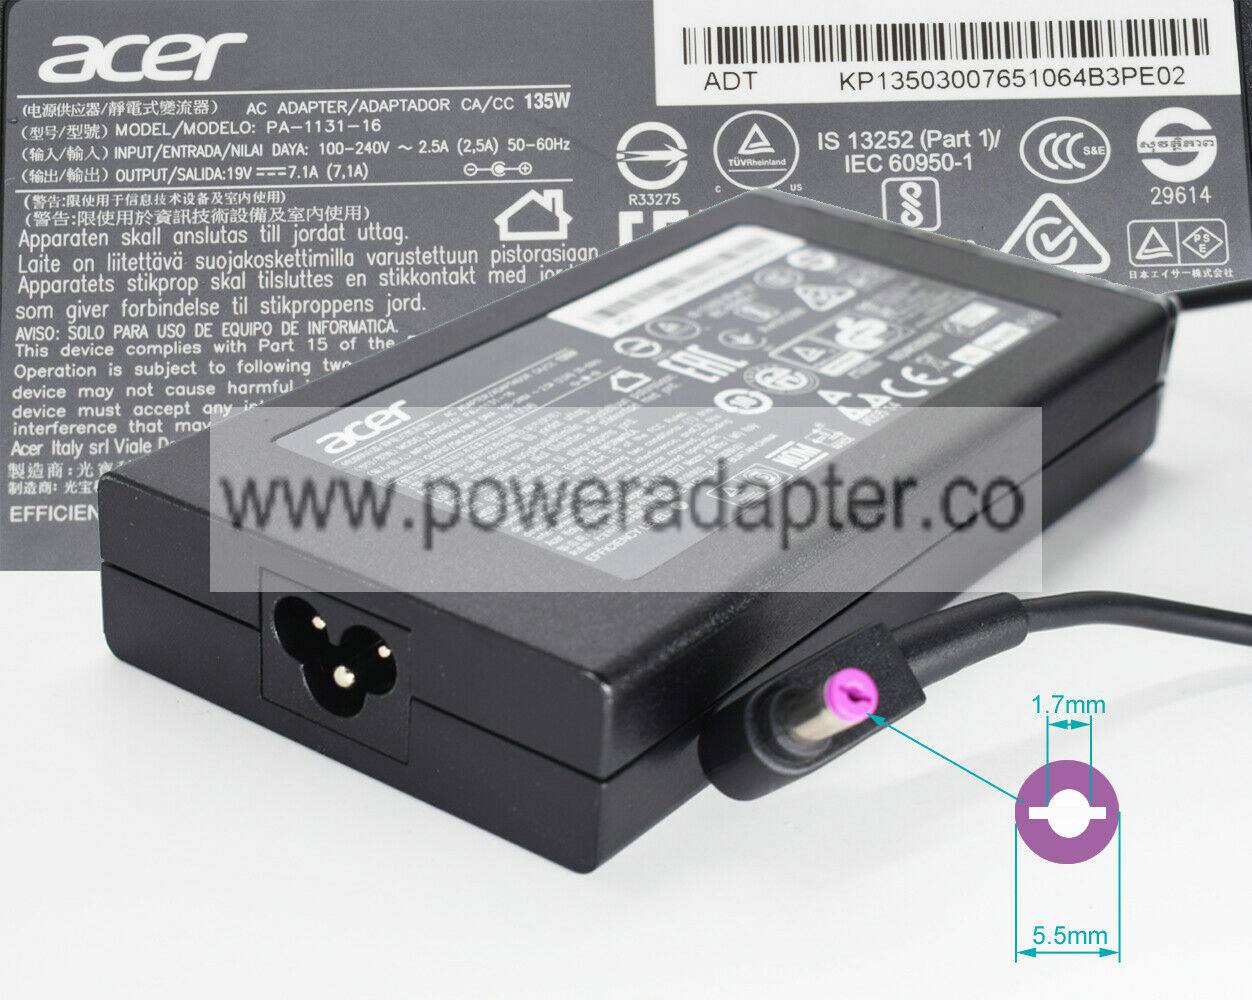 1pc Genuine Acer 19V 7.1A 135W 5.5x1.7mm AC/DC Power Charger Adapter PA-1131-16 1pc Genuine Acer 19V 7.1A 135W 5.5x1.7